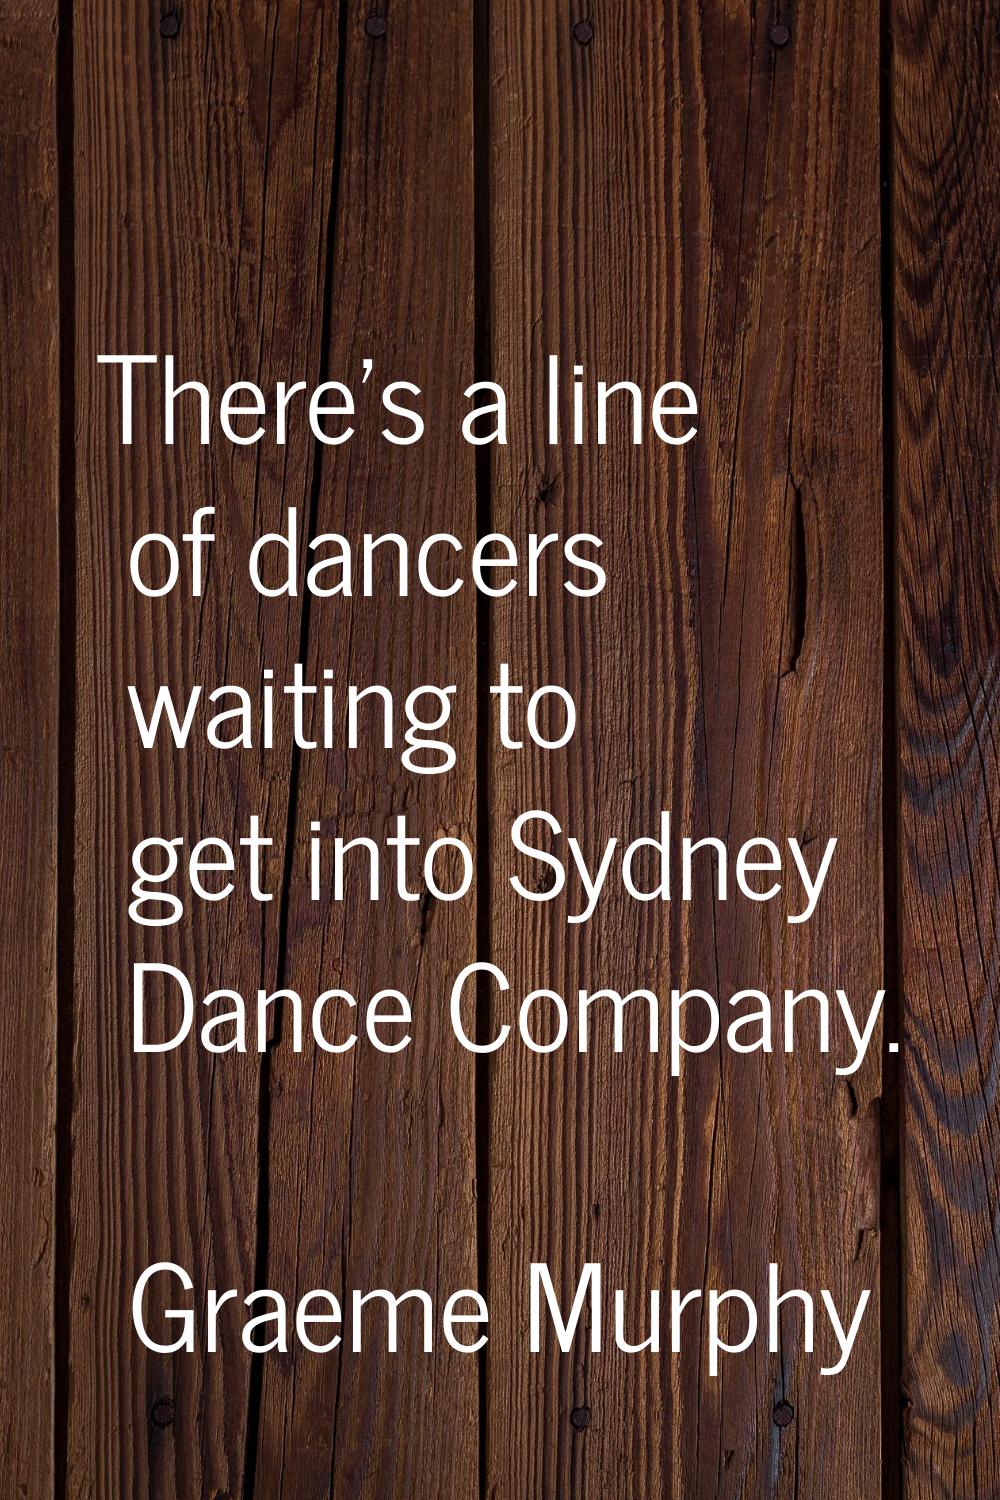 There's a line of dancers waiting to get into Sydney Dance Company.